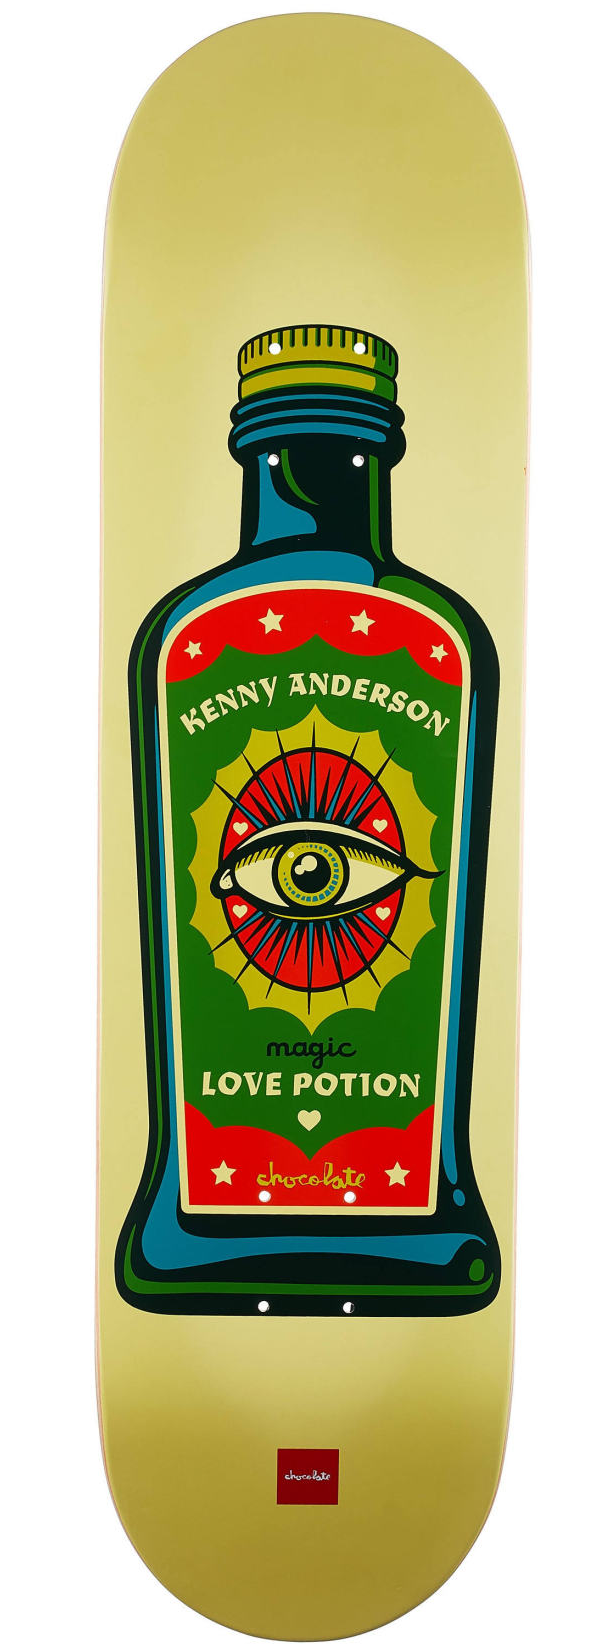 Chocolate Skateboard Company Anderson Hecox Essentials Series Magic Love Potion Deck 8.5 in